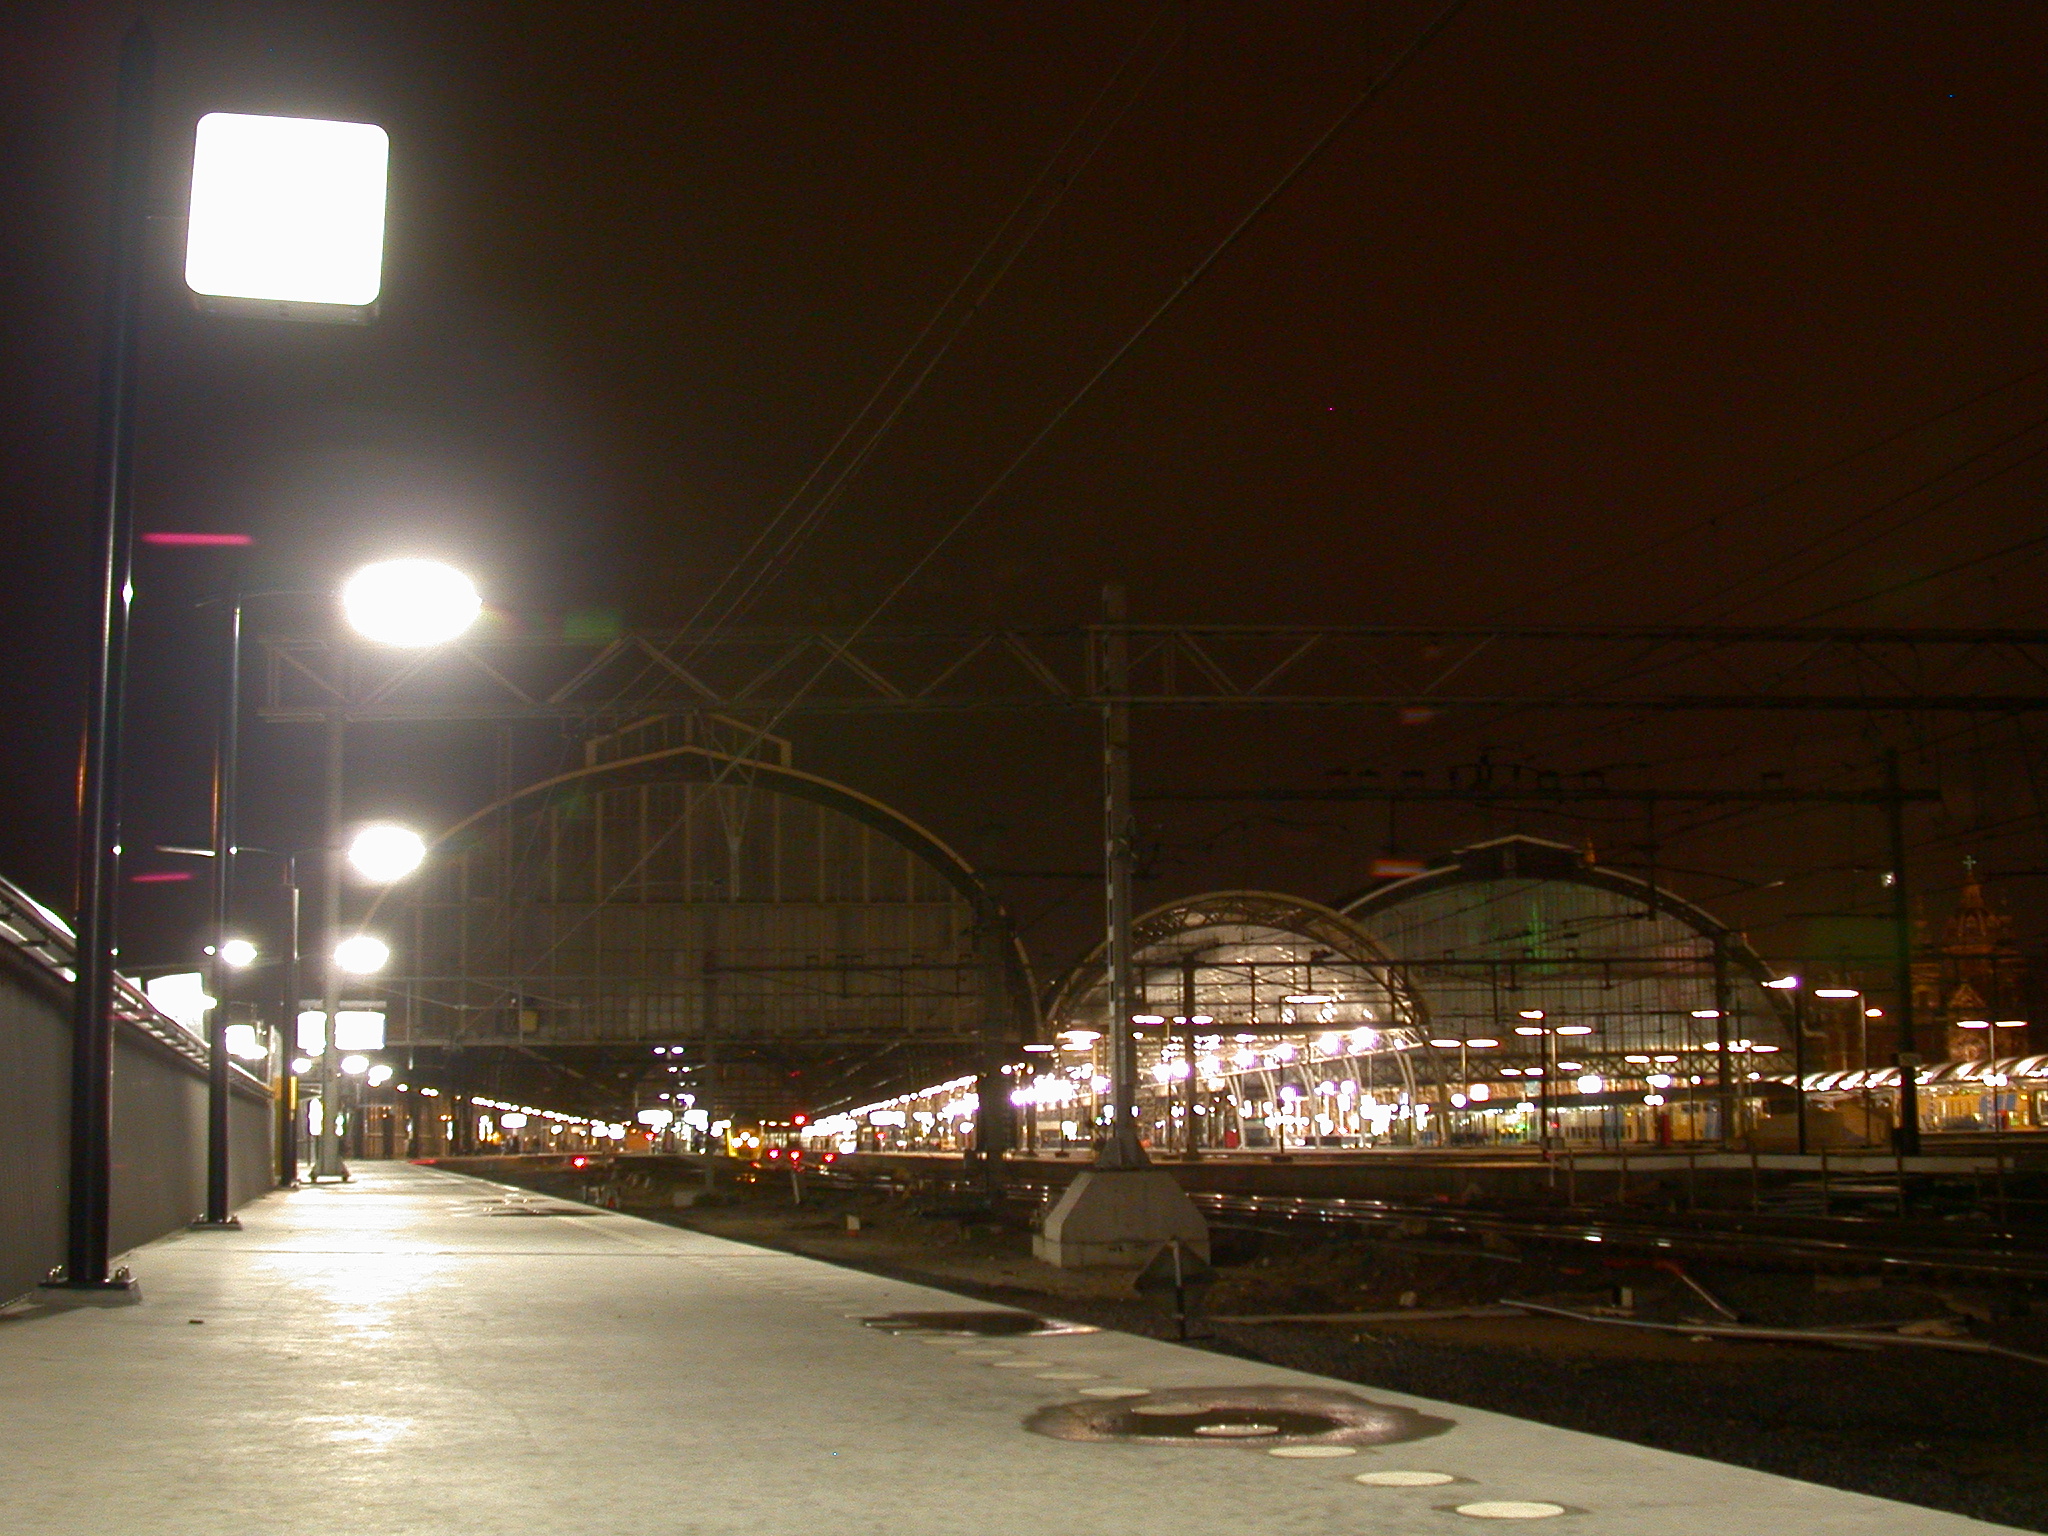 night nighttime night-time time dark bright light railway station central arches roof